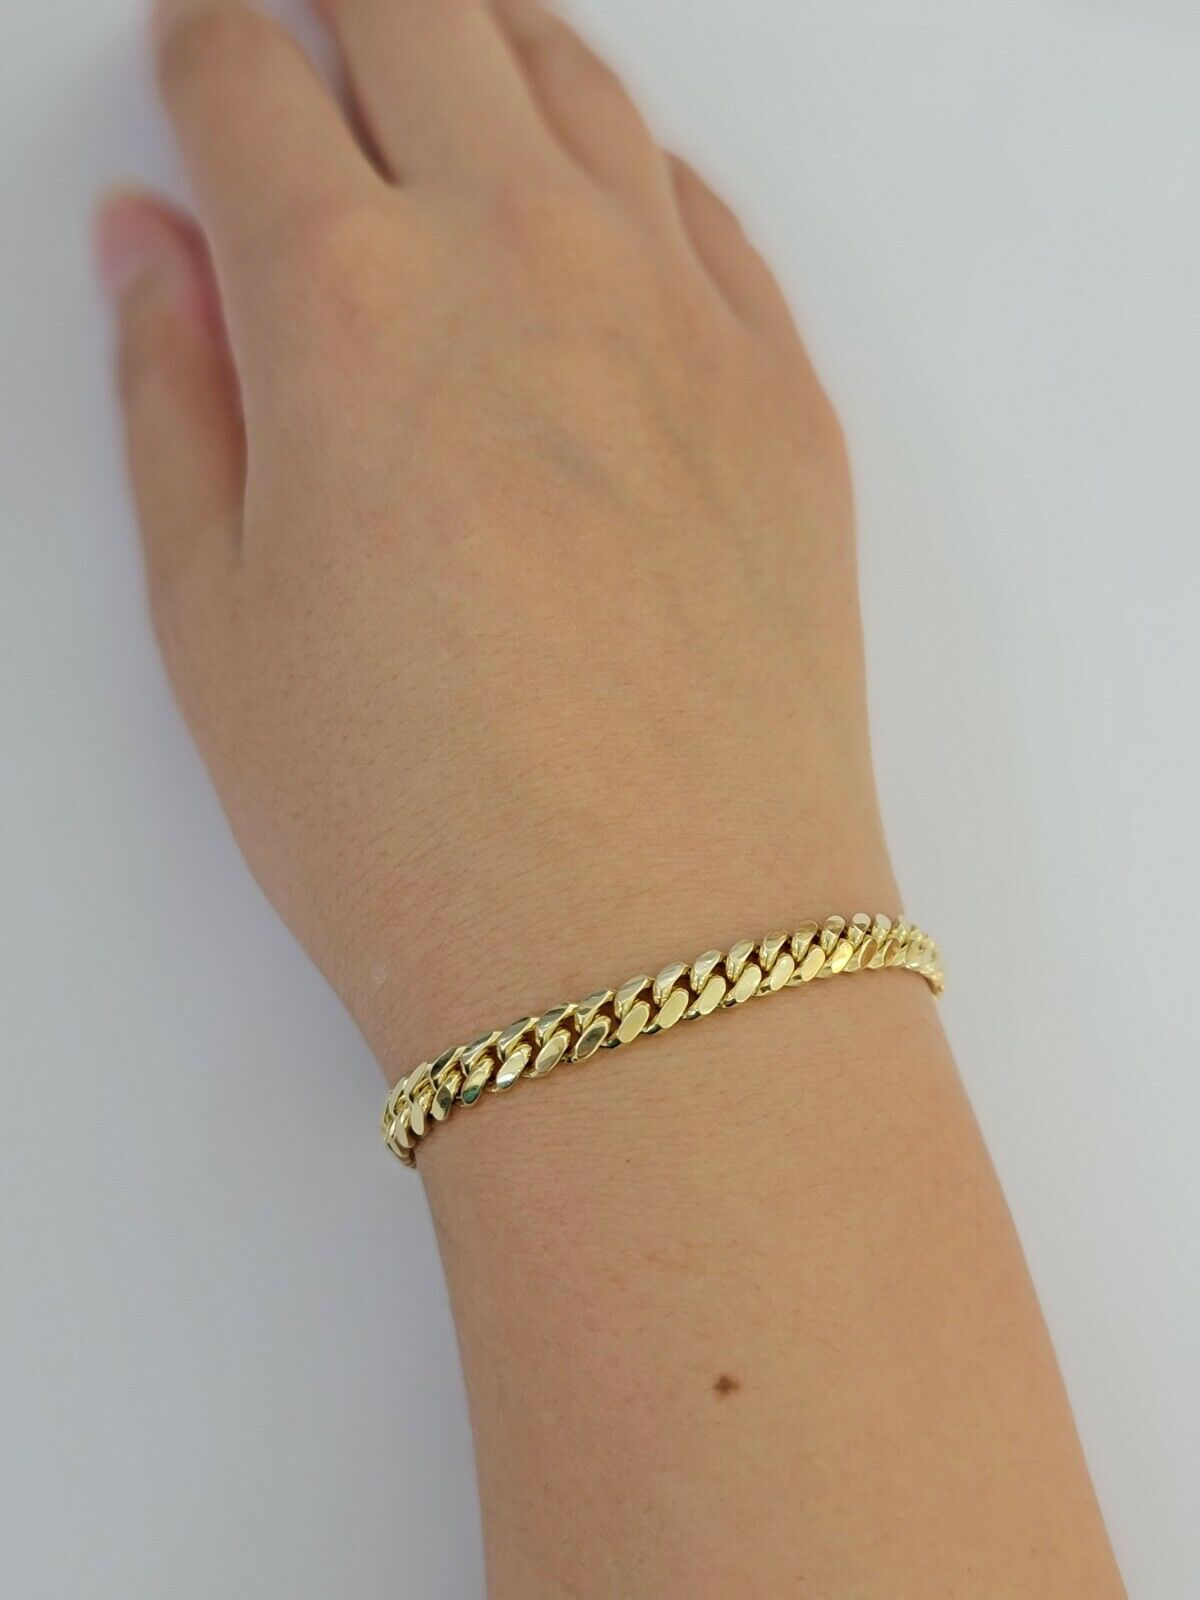 Real Gold maimi cuban Link Ladies bracelet 7Inch 6mm Real 10kt yellow Gold Women